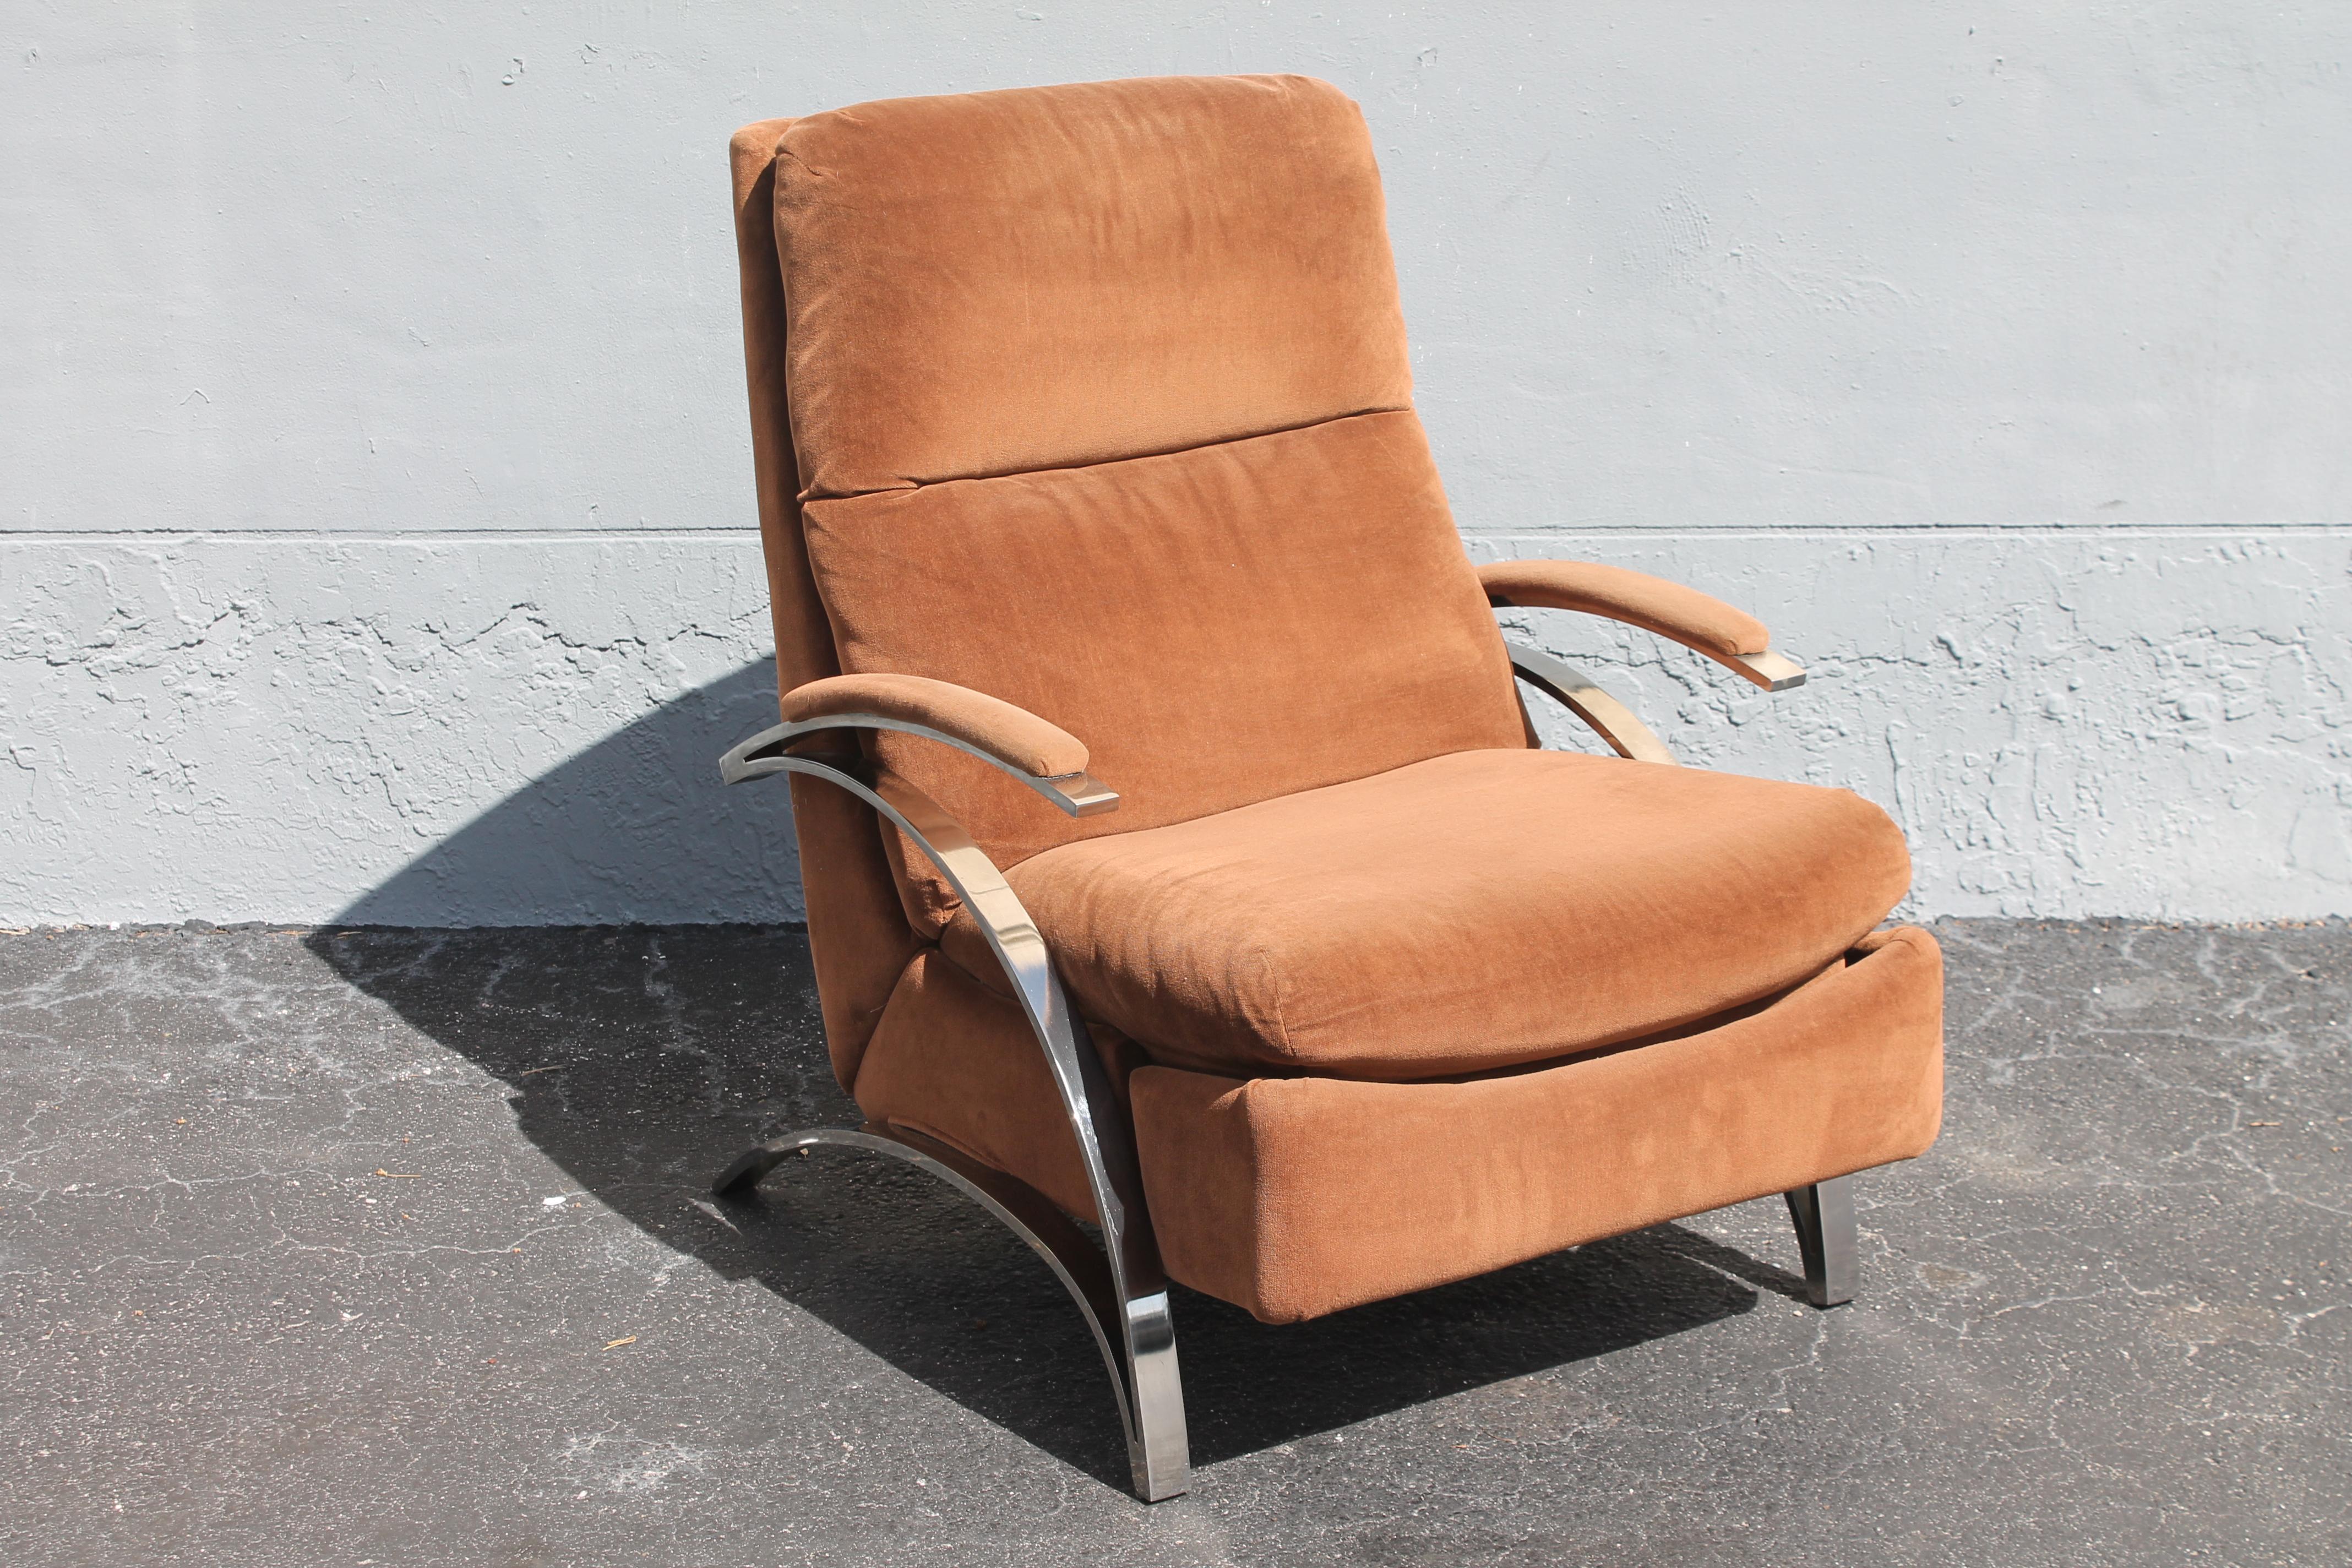 1970's Vintage Plush Brown Comfortable Reclining Chair/ Barcalounger. Very comfortable this chair is!  Everything about this chair works, There are no issues